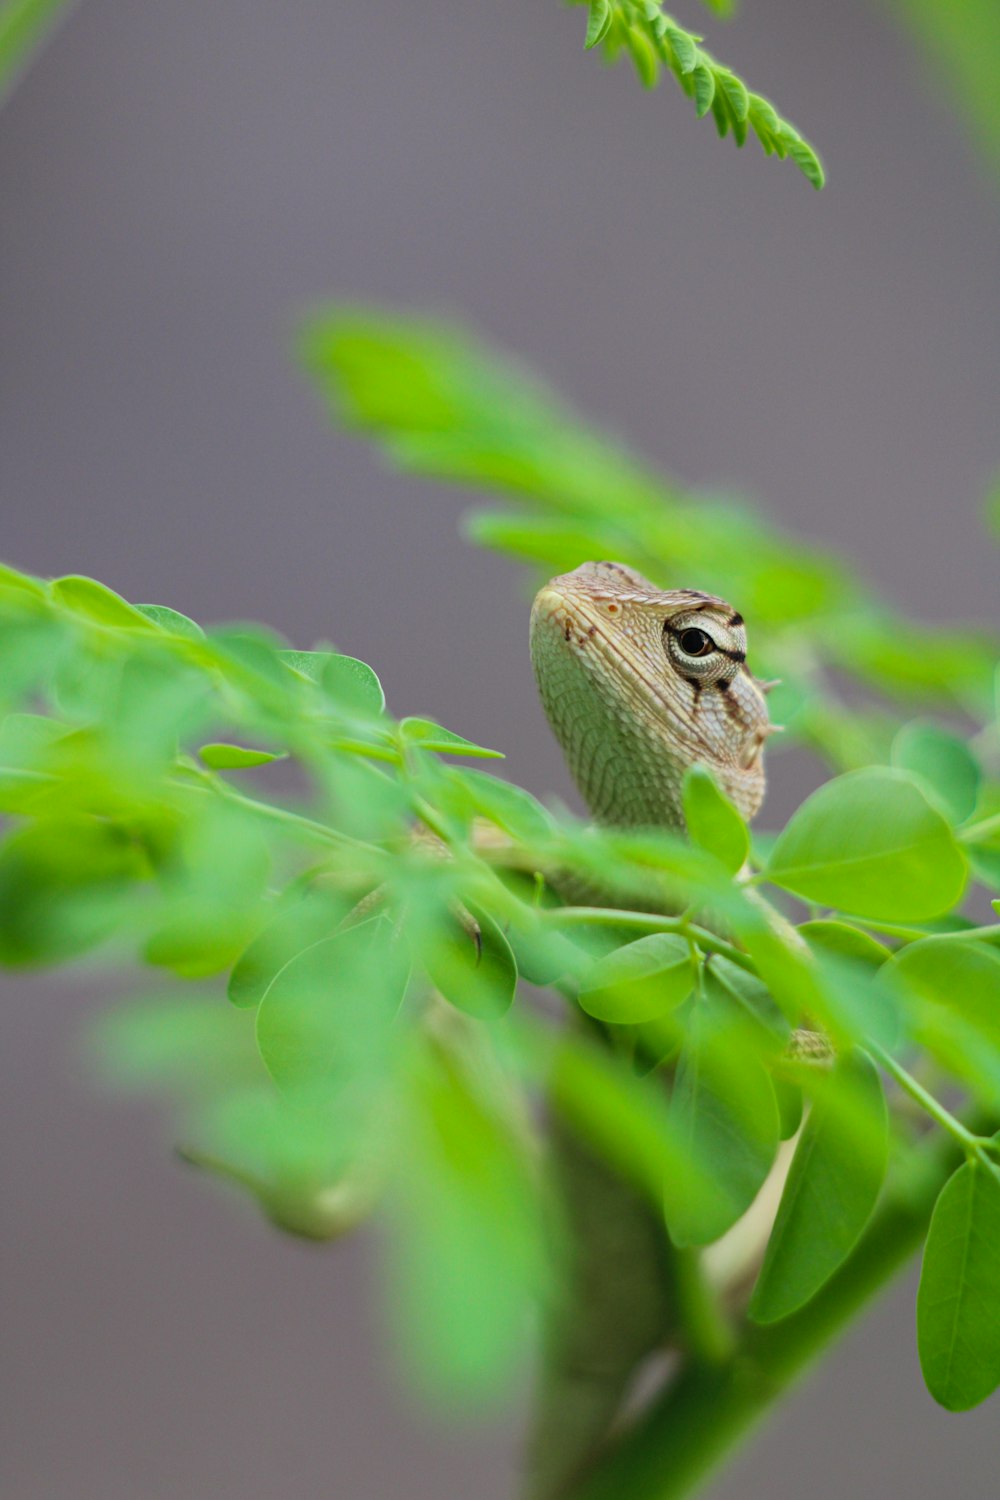 a small lizard sitting on top of a green plant